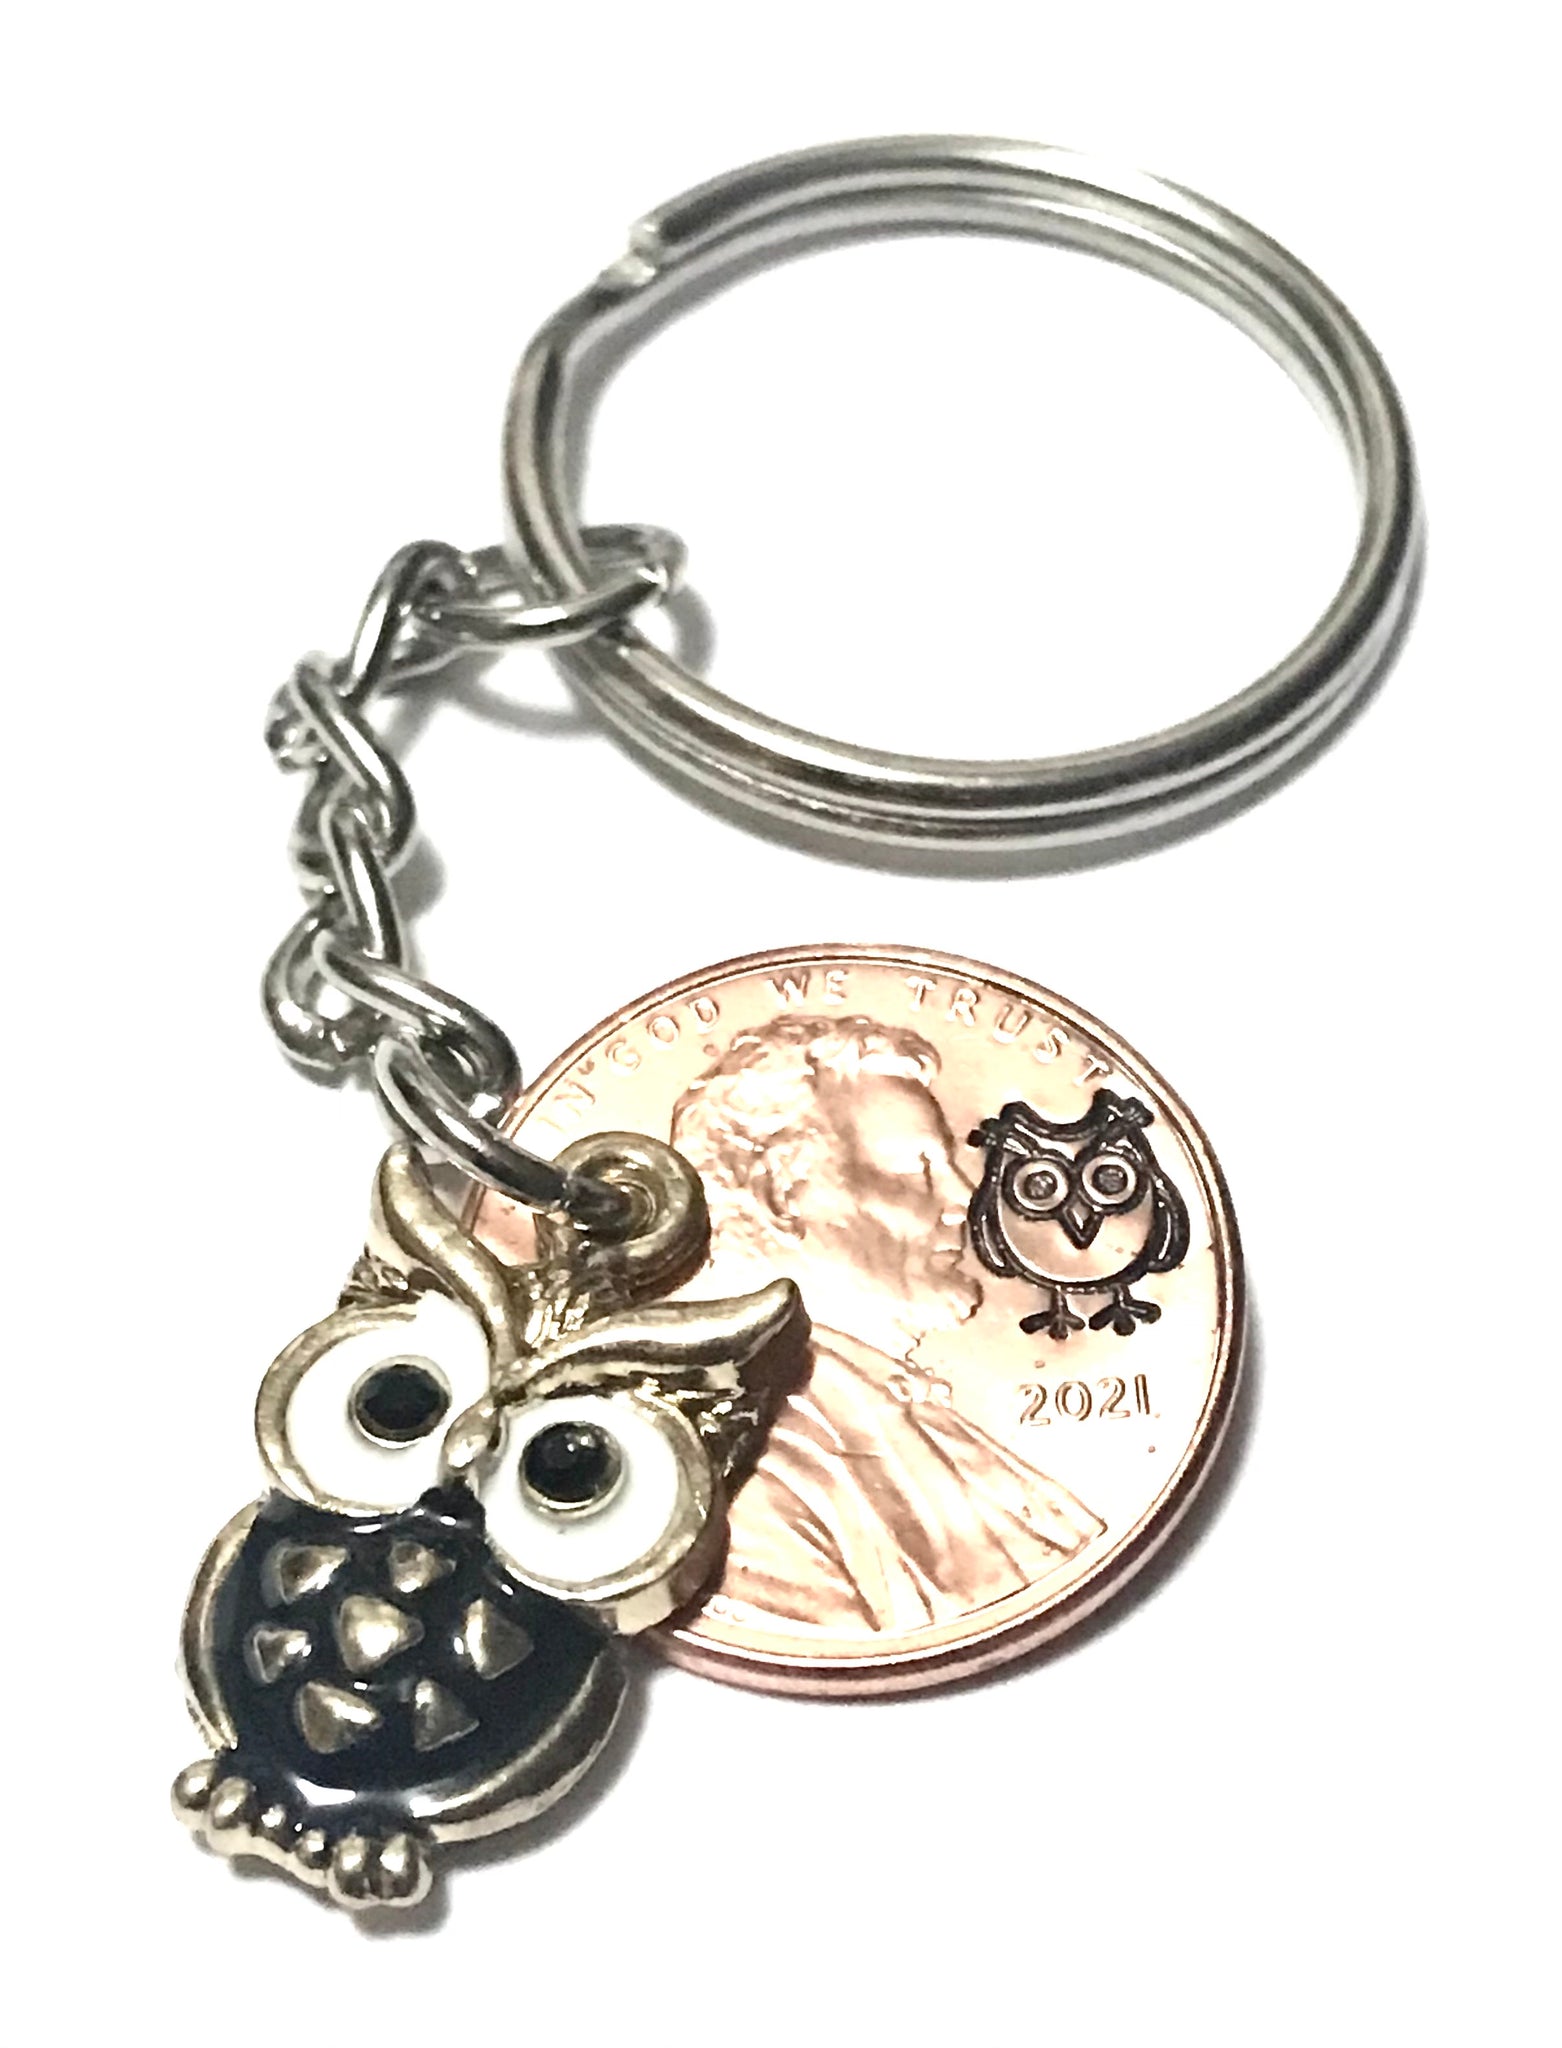 Black Owl Charm on a Lucky Penny Keychain with an Owl engraving above the date of a Lincoln Cent.